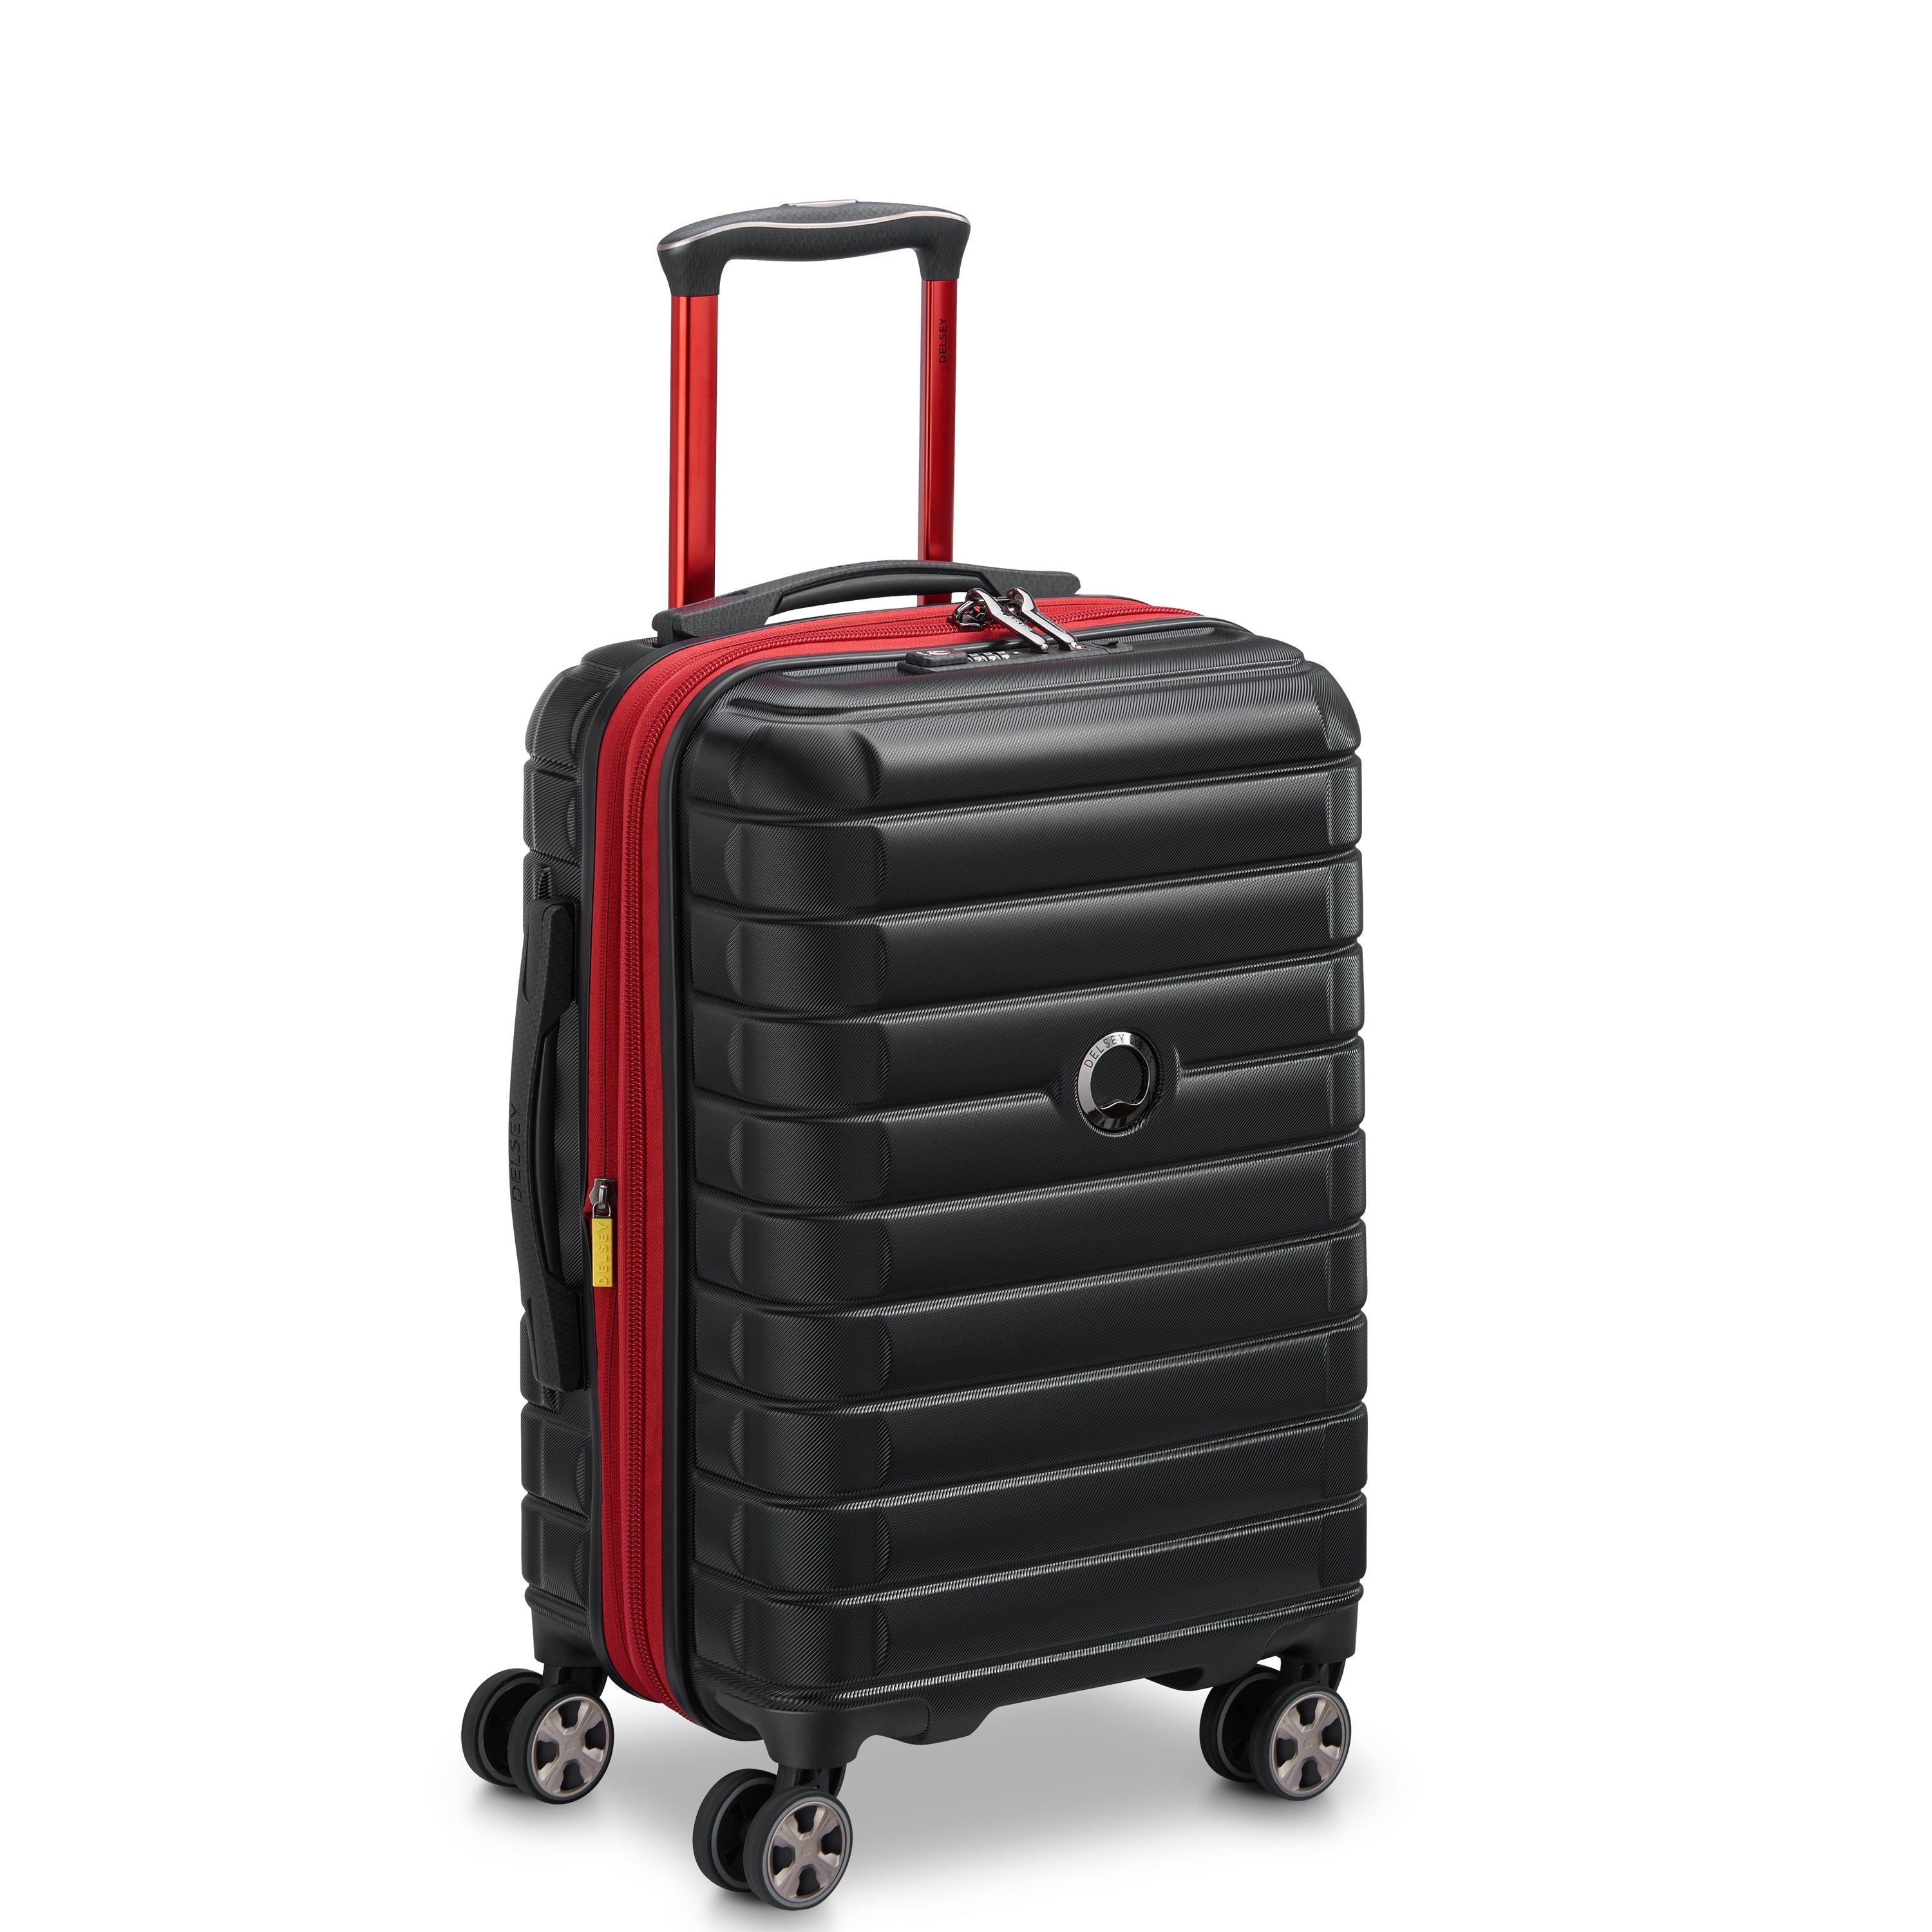 Delsey Shadow 5.0 Alfa Romeo F1 Collection 55cm Hardcase Expandable 4 Double Wheel Cabin Luggage Trolley Case Black - 00287880100F1